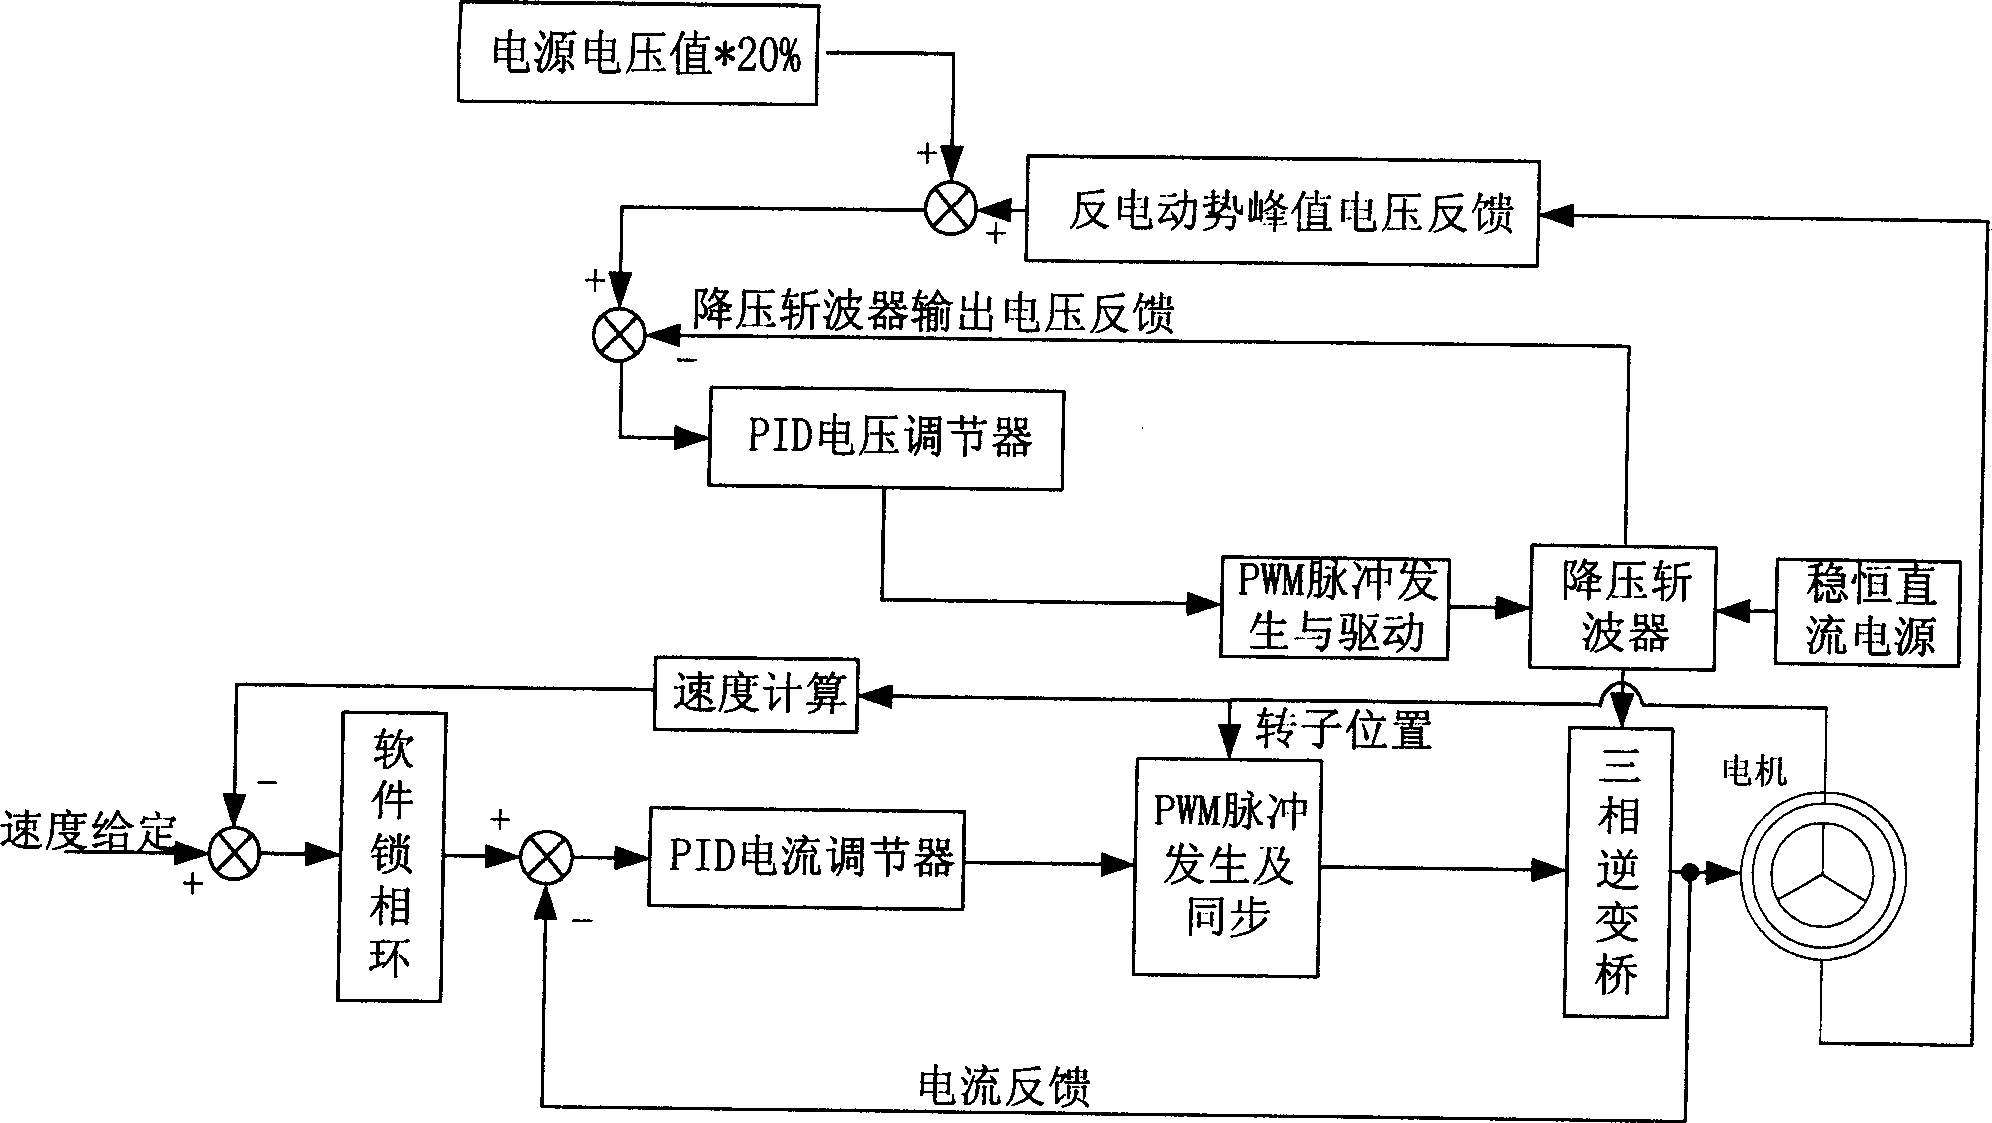 Power-consumption control system of small armature electric induction permanent magnet brush-less DC motor